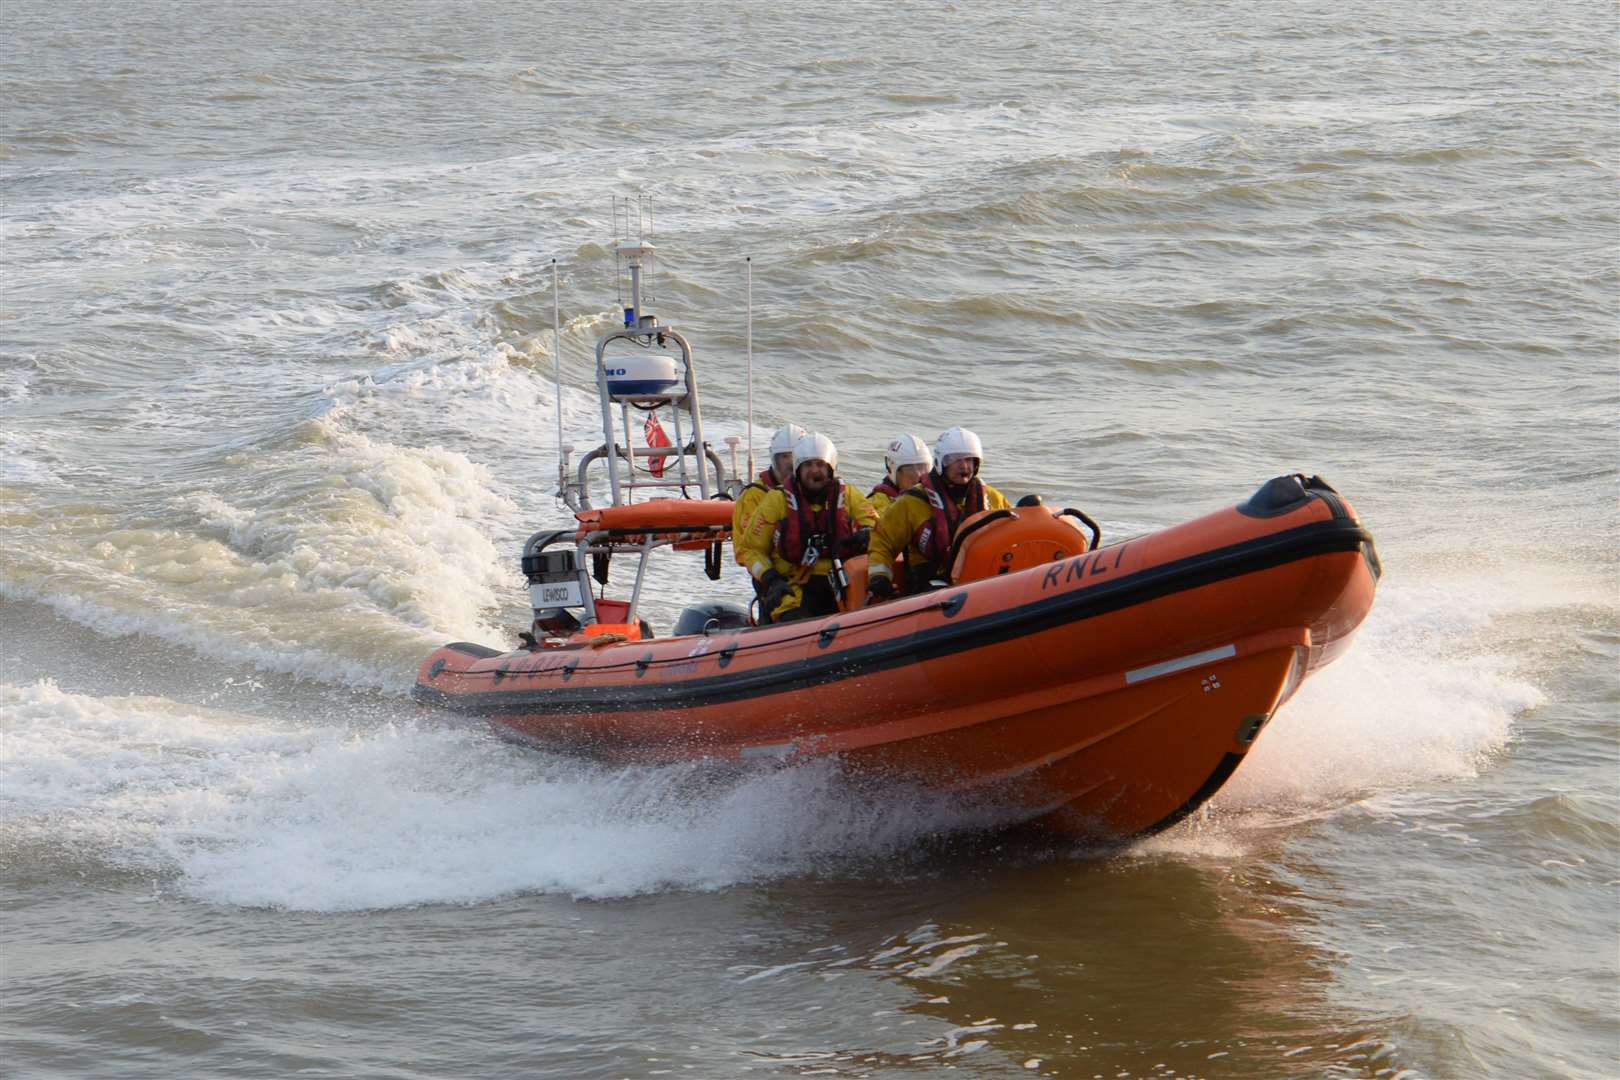 The Whitstable RNLI lifeboat. Picture: Chris Davey/RNLI Whitstable